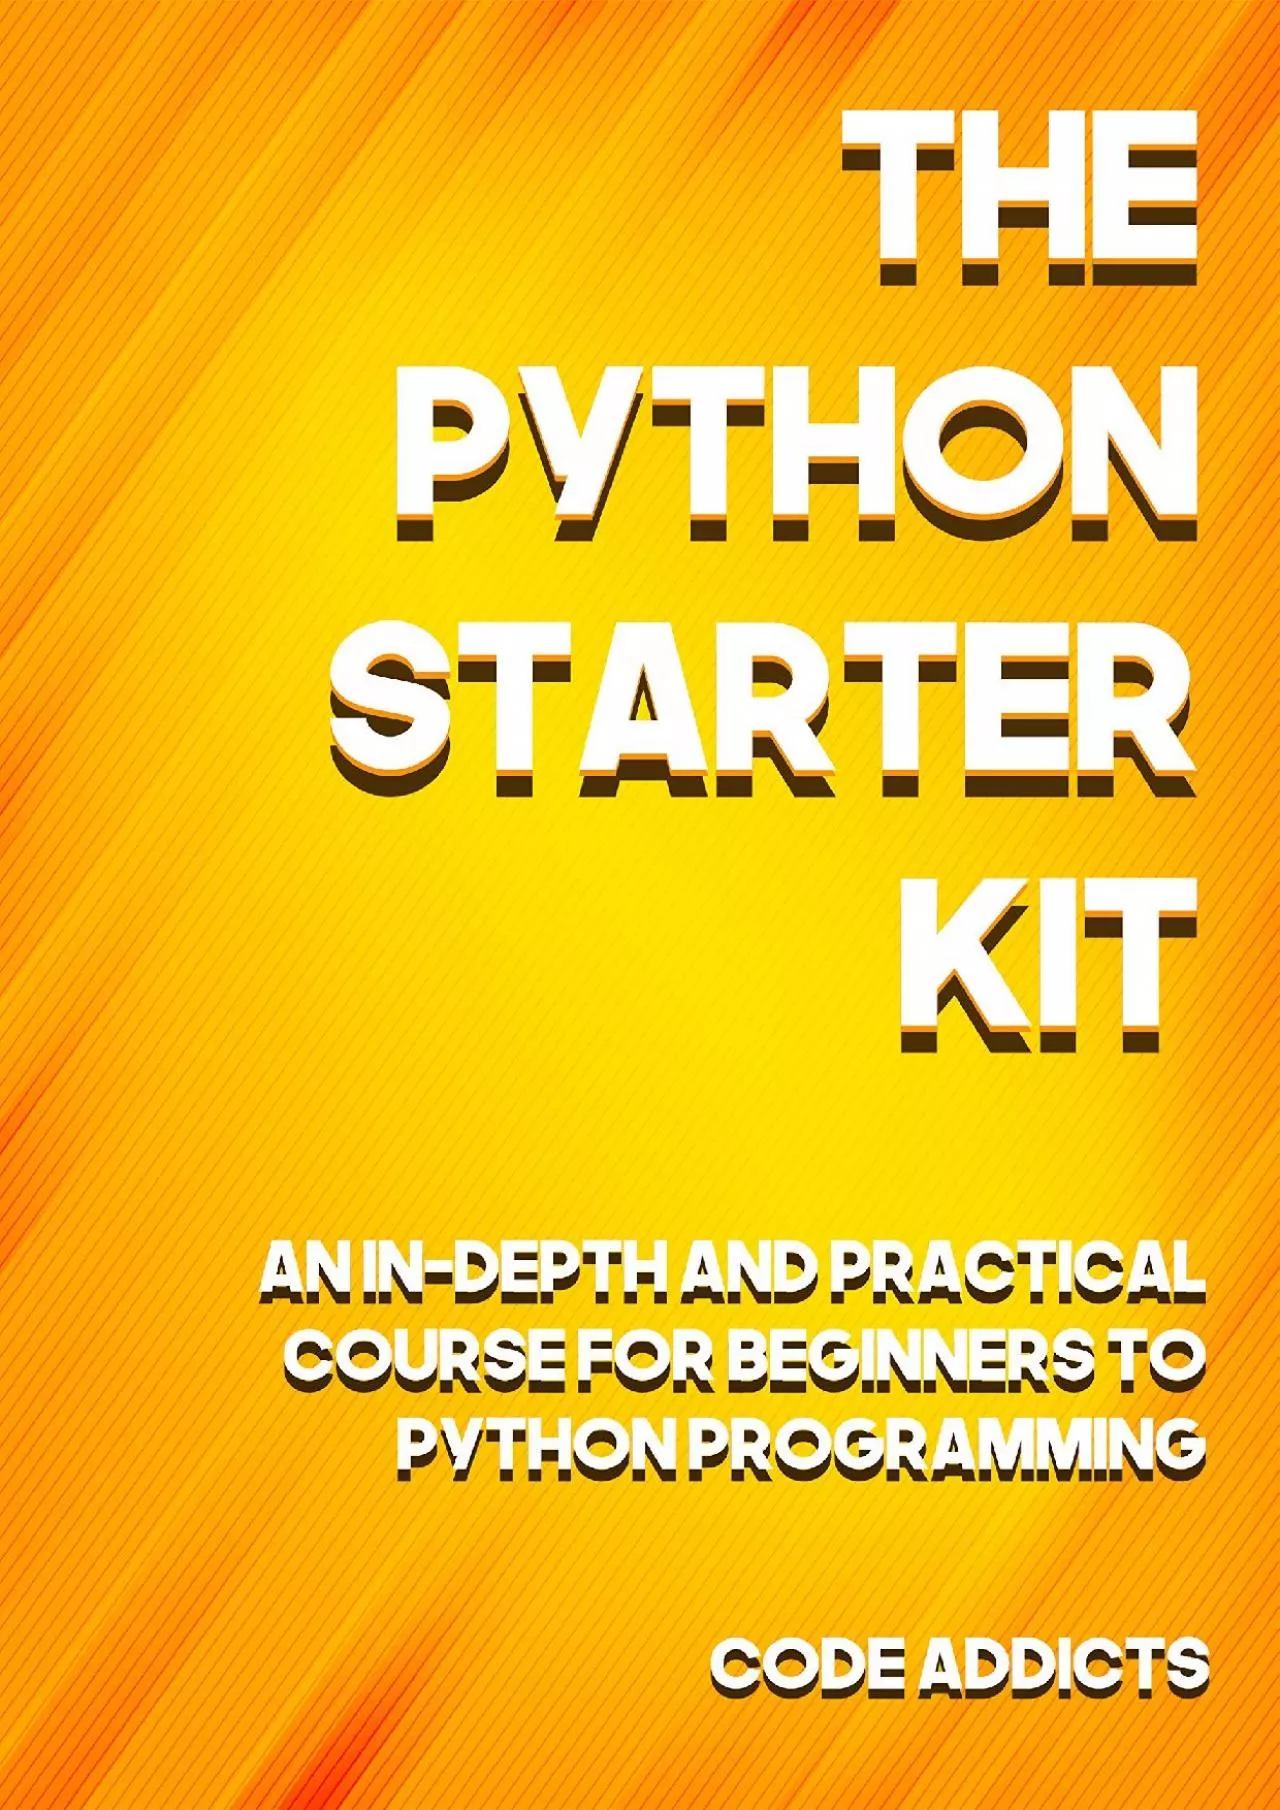 [READ]-The Python Starter Kit: An In-depth and Practical course for beginners to Python